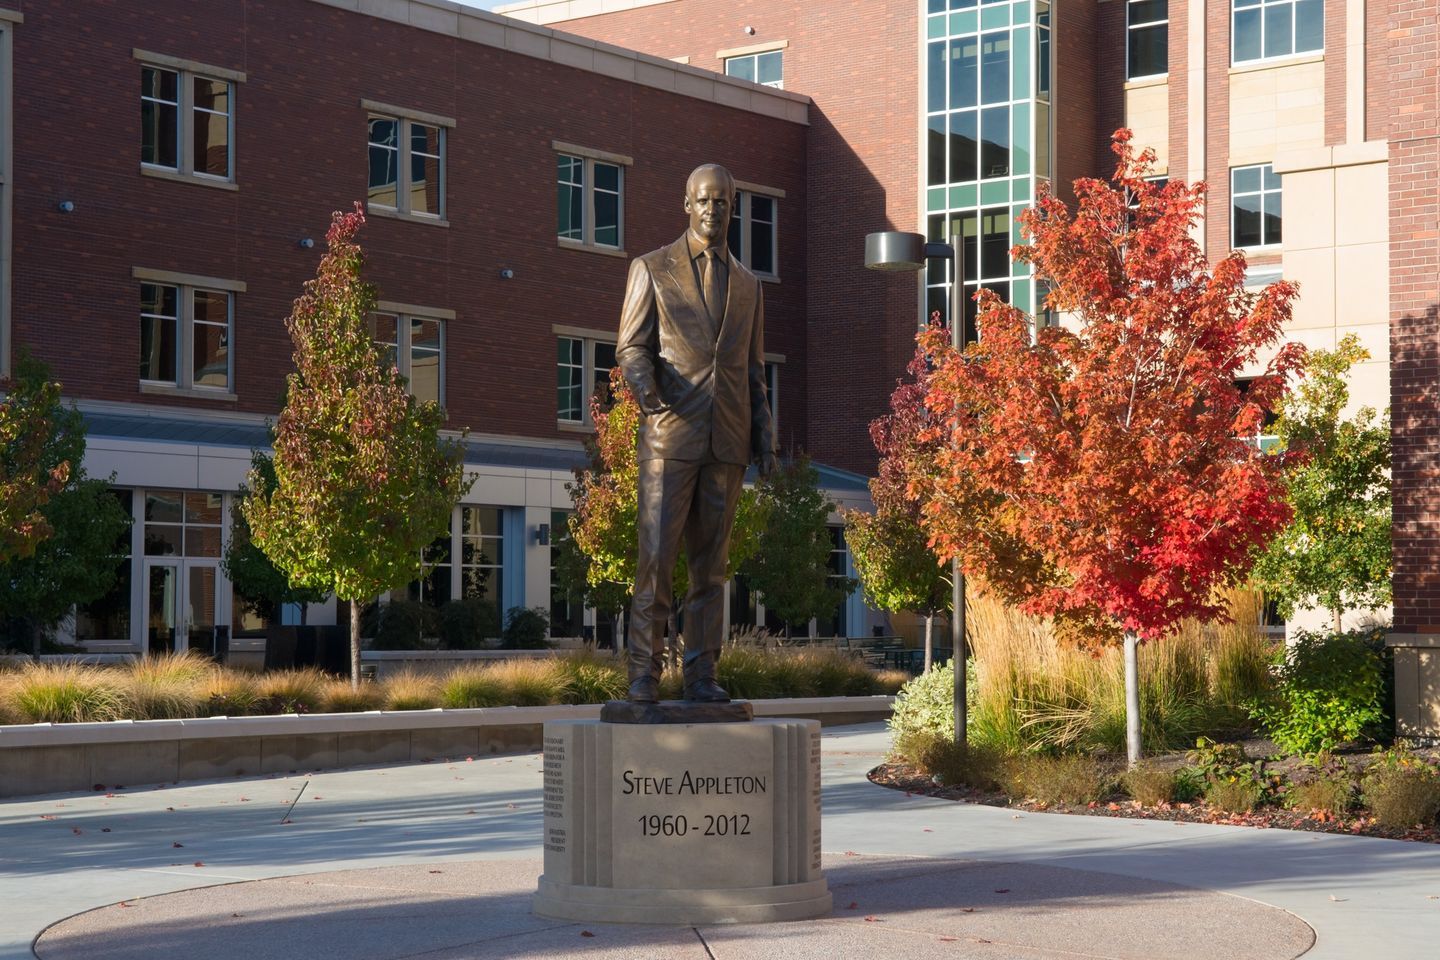 The statue of Steve Appleton, late-founder & CEO of Micron, in the courtyard of MBEB.